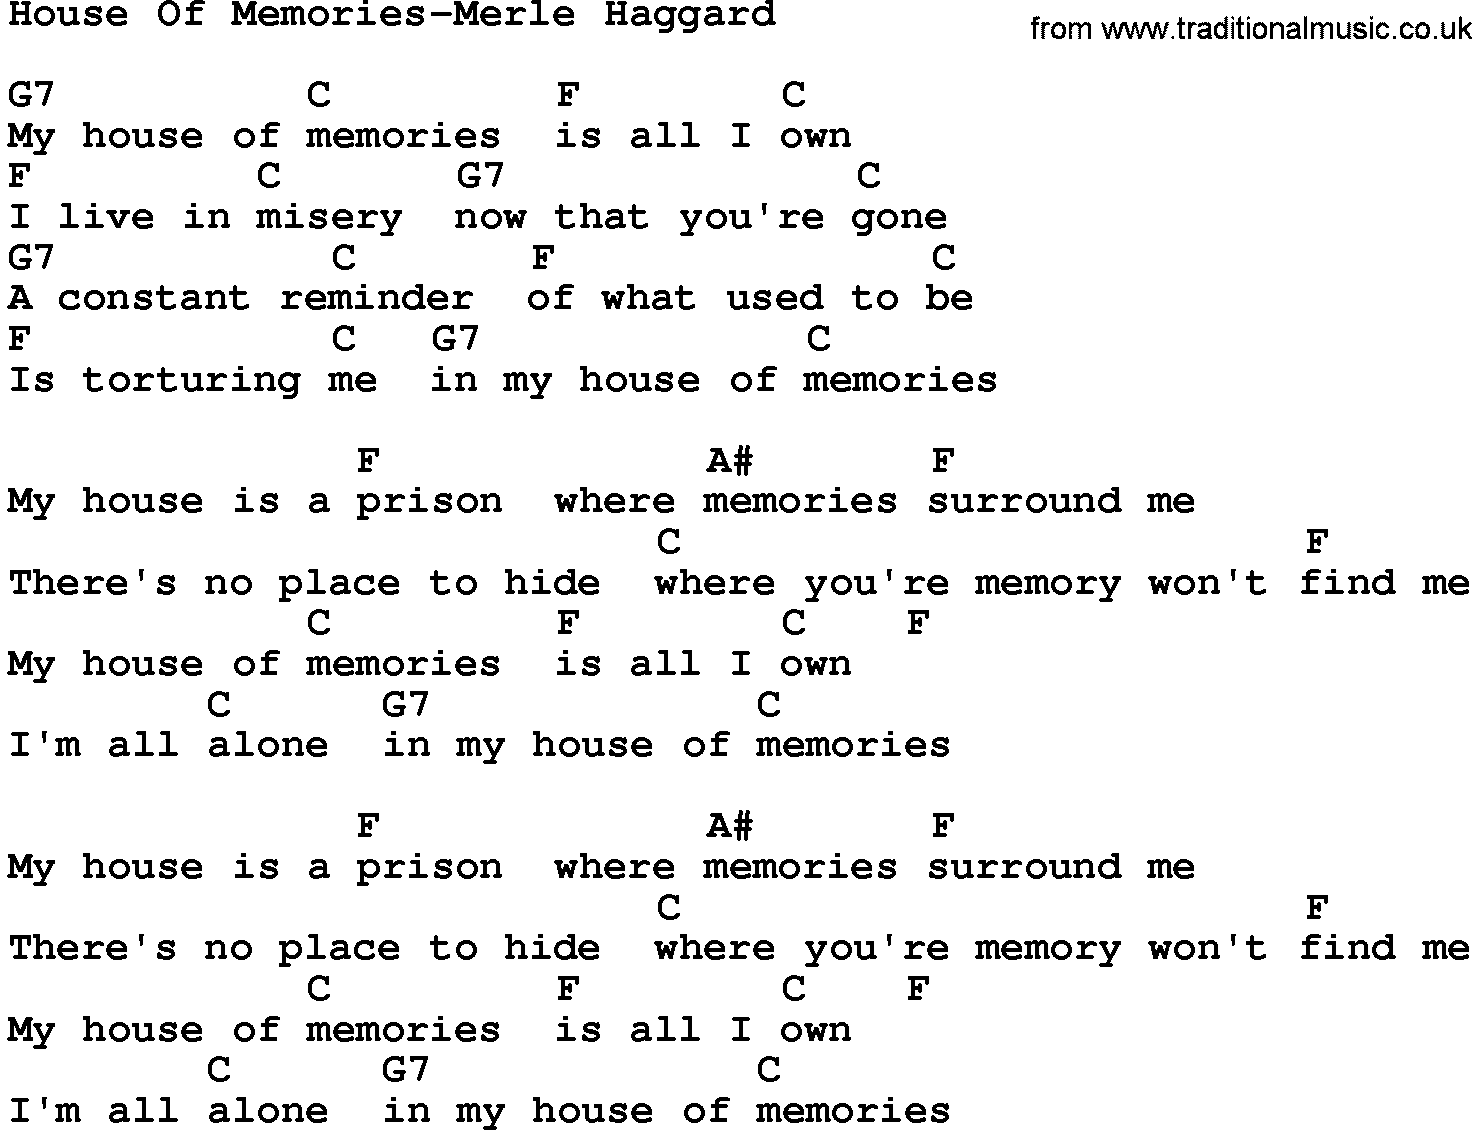 Country music song: House Of Memories-Merle Haggard lyrics and chords